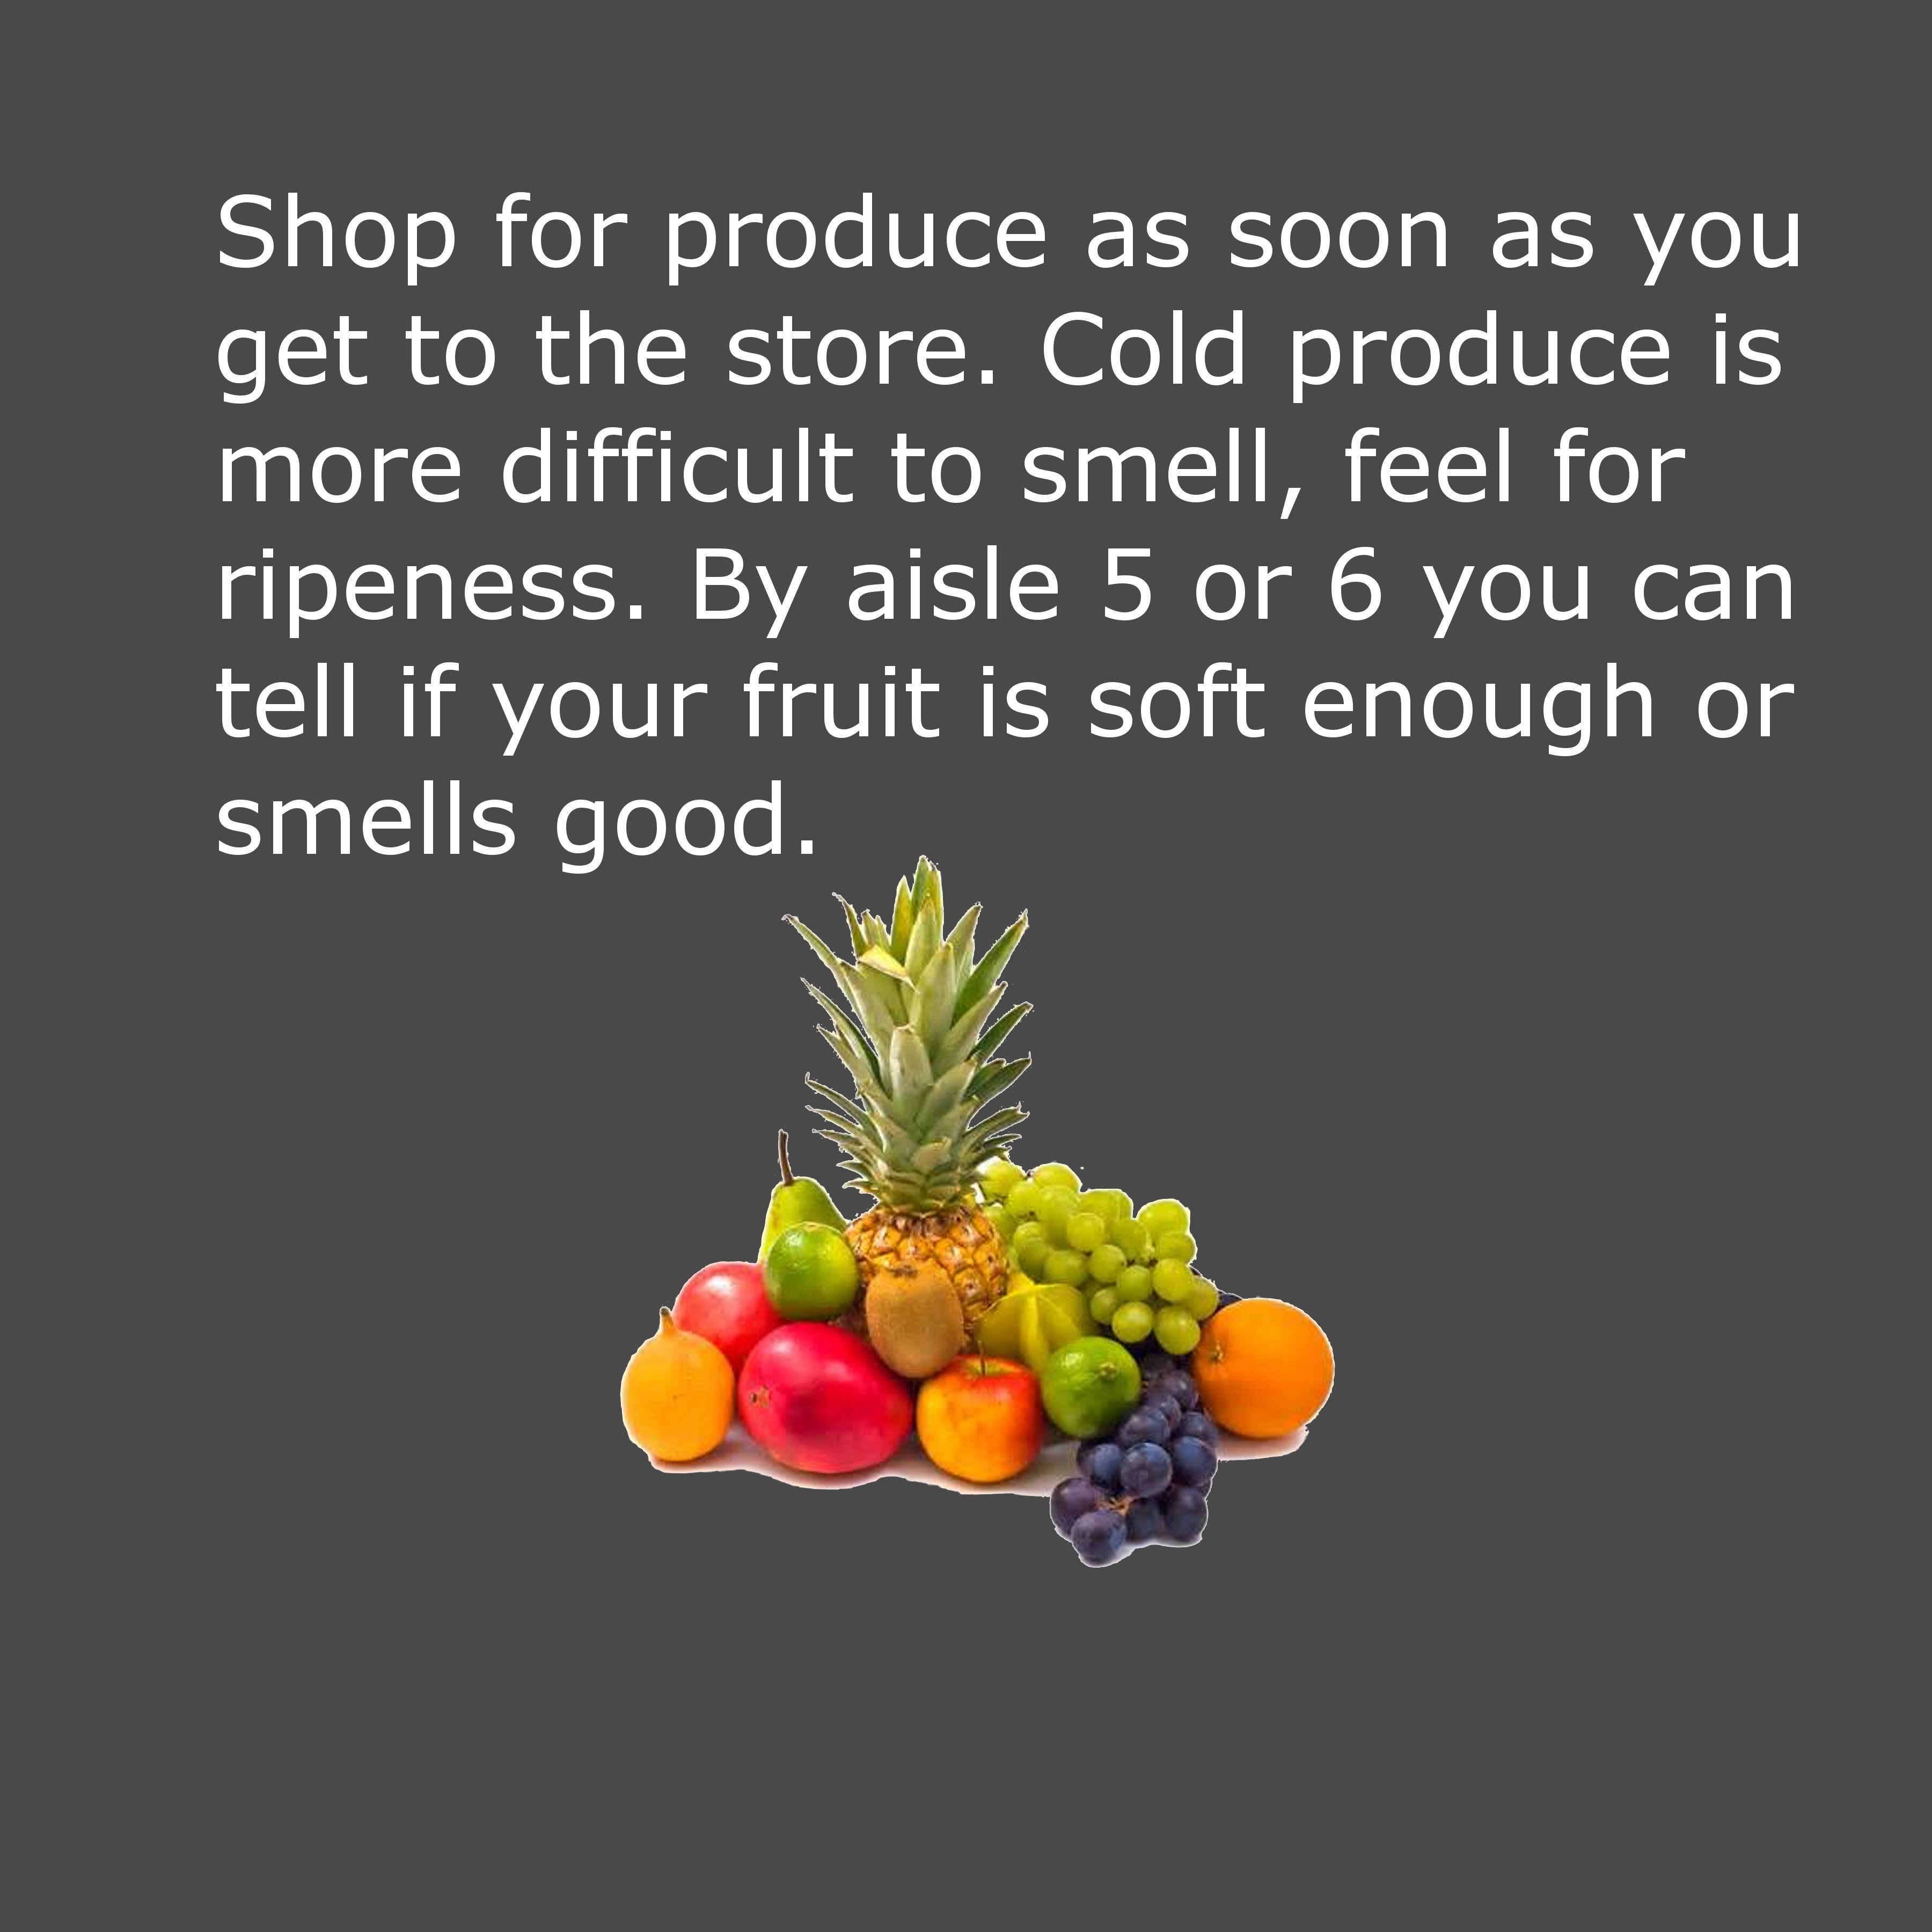 natural foods - Shop for produce as soon as you get to the store. Cold produce is more difficult to smell, feel for ripeness. By aisle 5 or 6 you can tell if your fruit is soft enough or smells good.